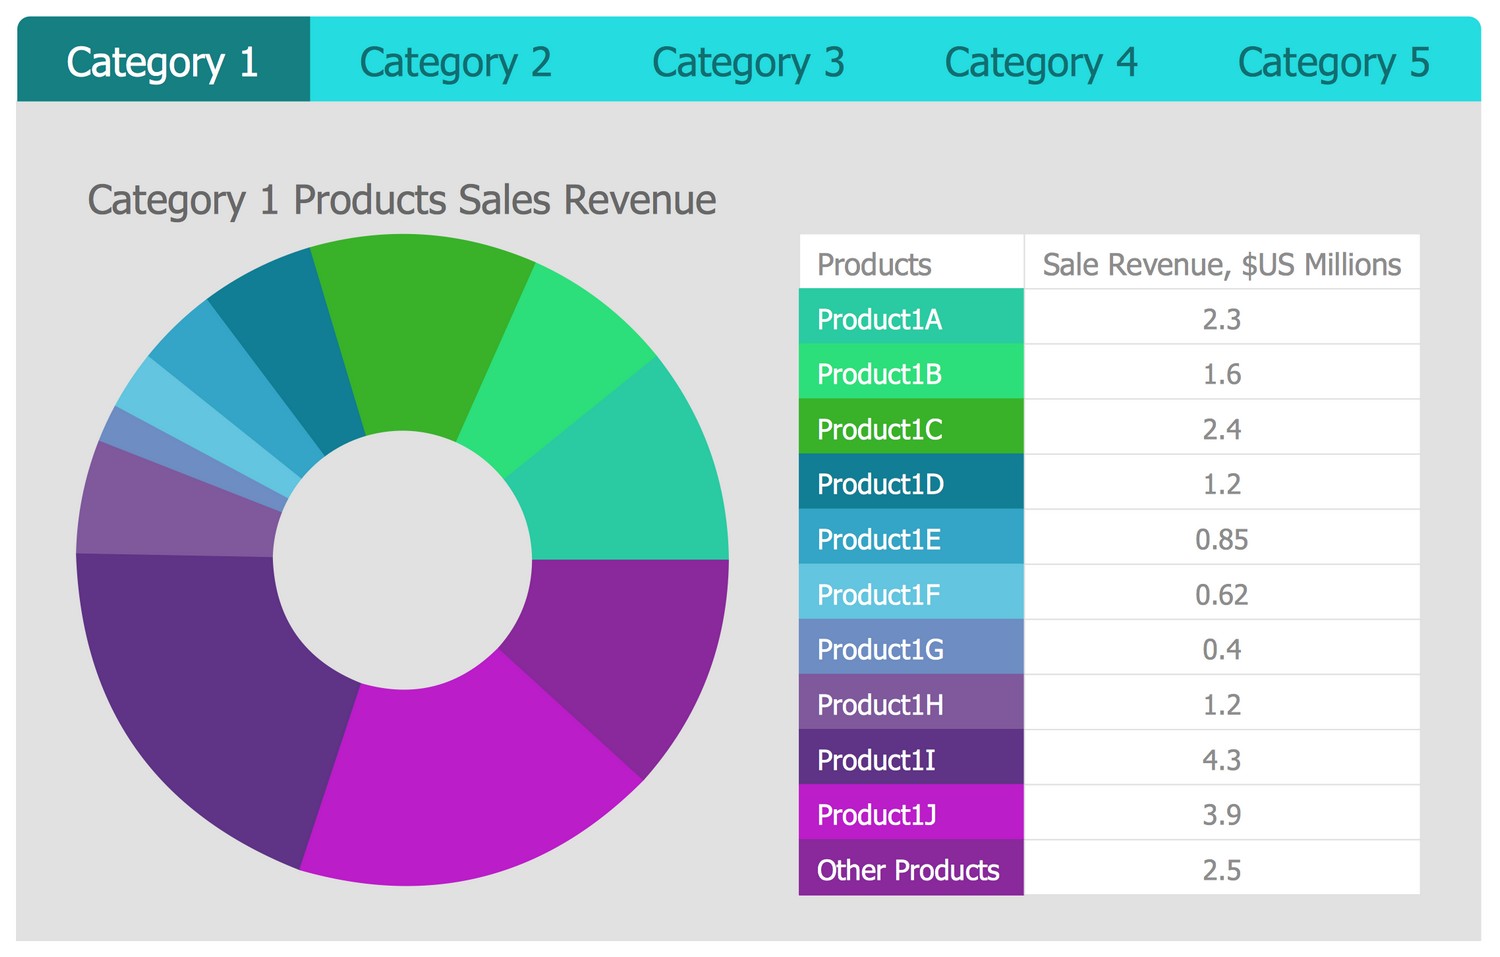 Business Intelligence Dashboard - Quarter Sales Revenue for Top 10 Products by Categories